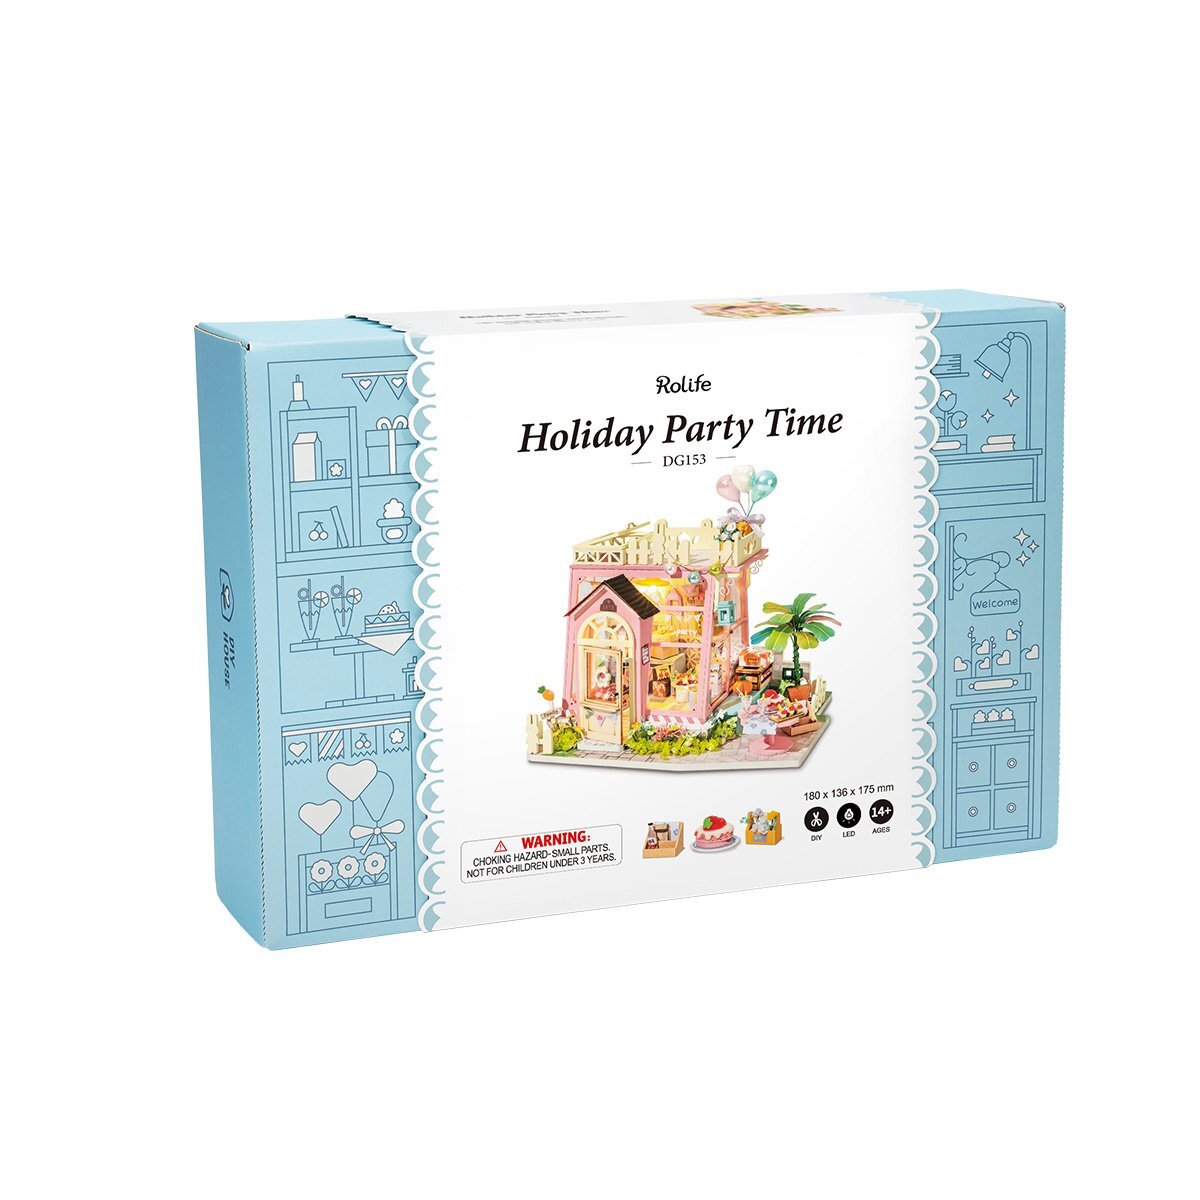 Rolife  DIY Miniature Dollhouse - Holiday Party Time DG153